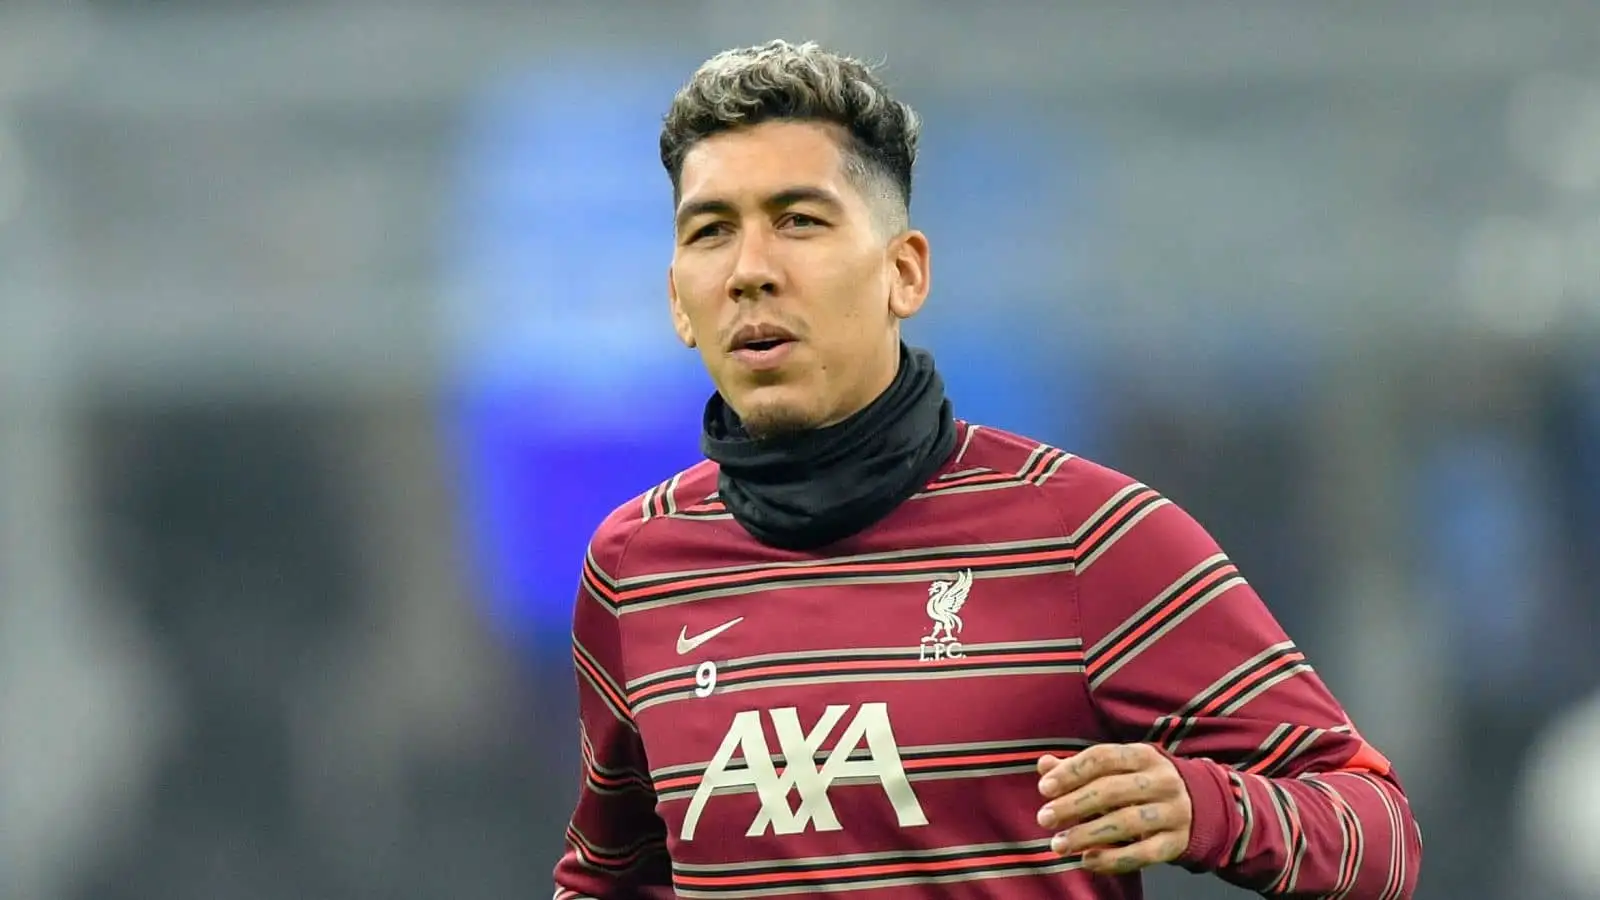 Roberto Firmino (9) of Liverpool is warming up before the UEFA Champions League match between Inter and Liverpool at Giuseppe Meazza in Milano